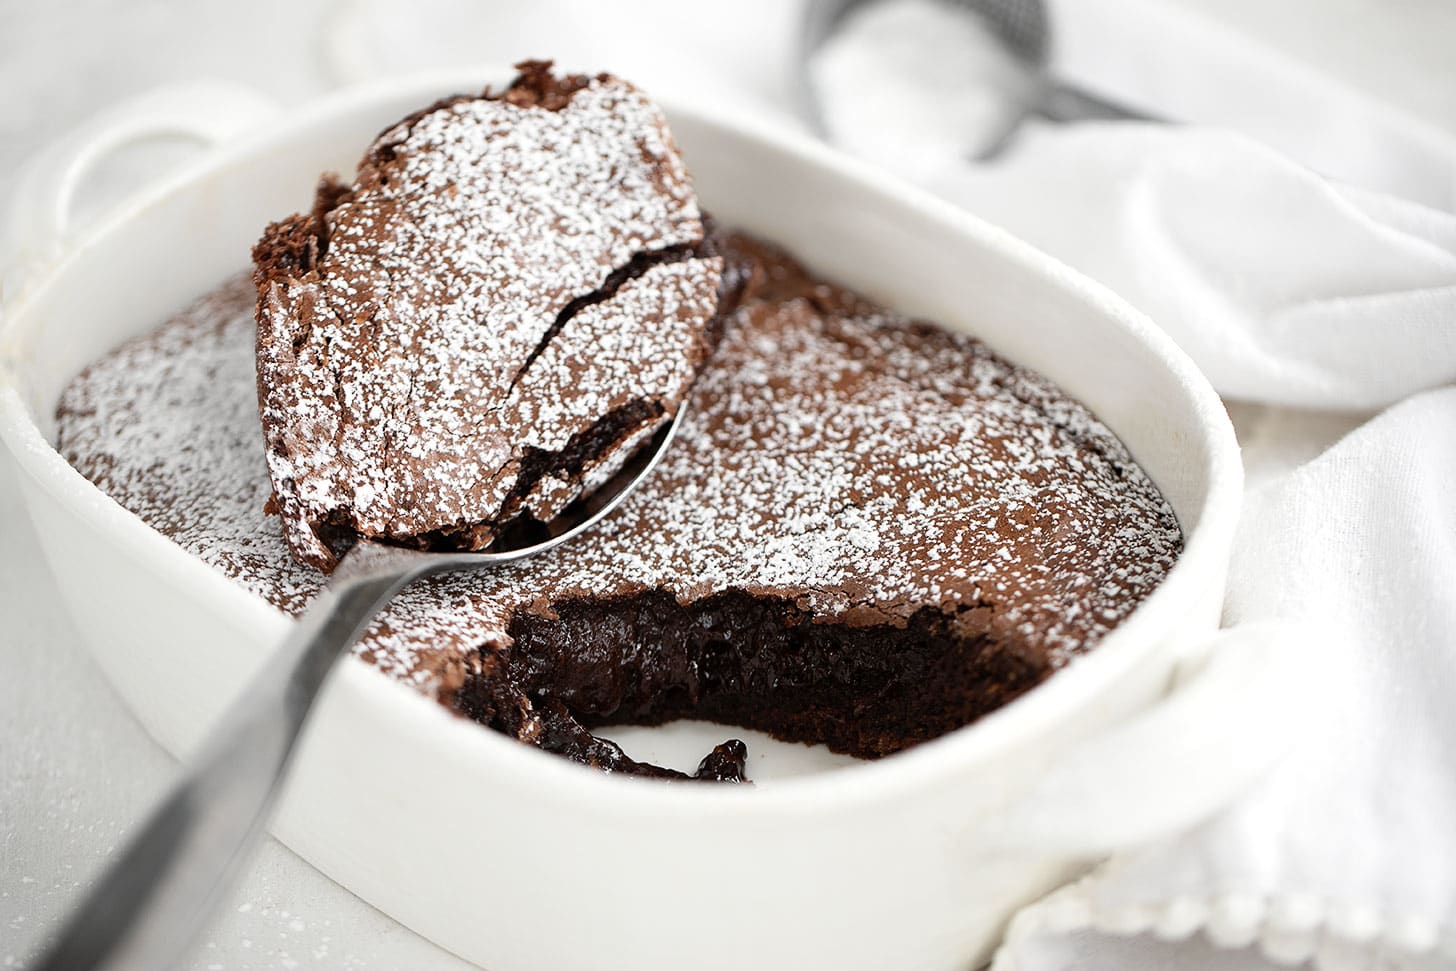 The chocolate brownie cake in baking dish with spoon.